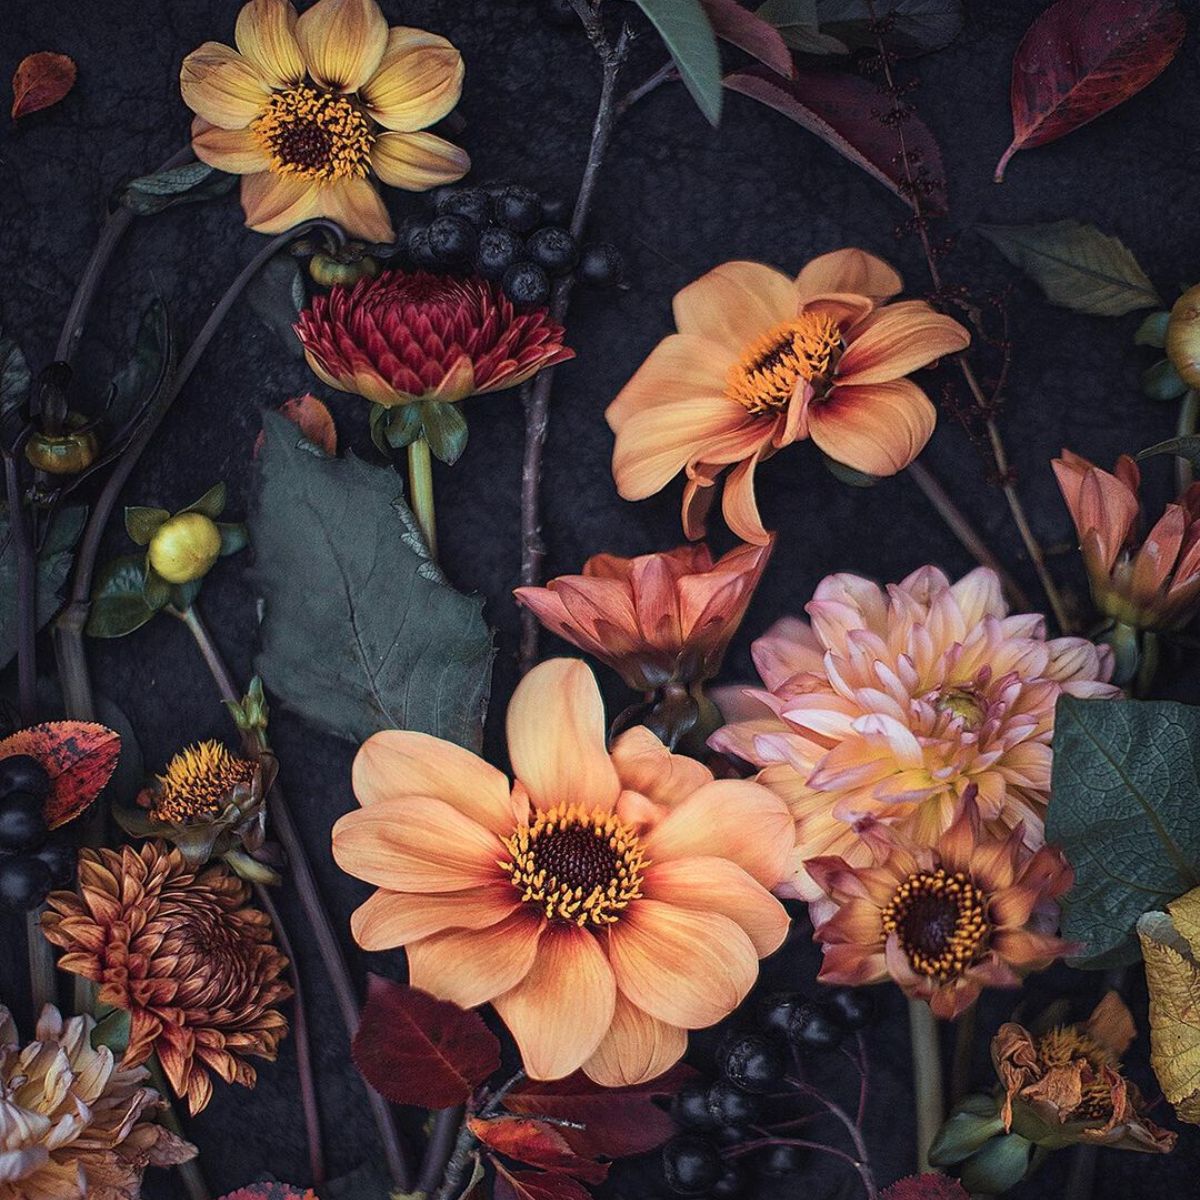 Colorful flowers photographed by Finnish artist